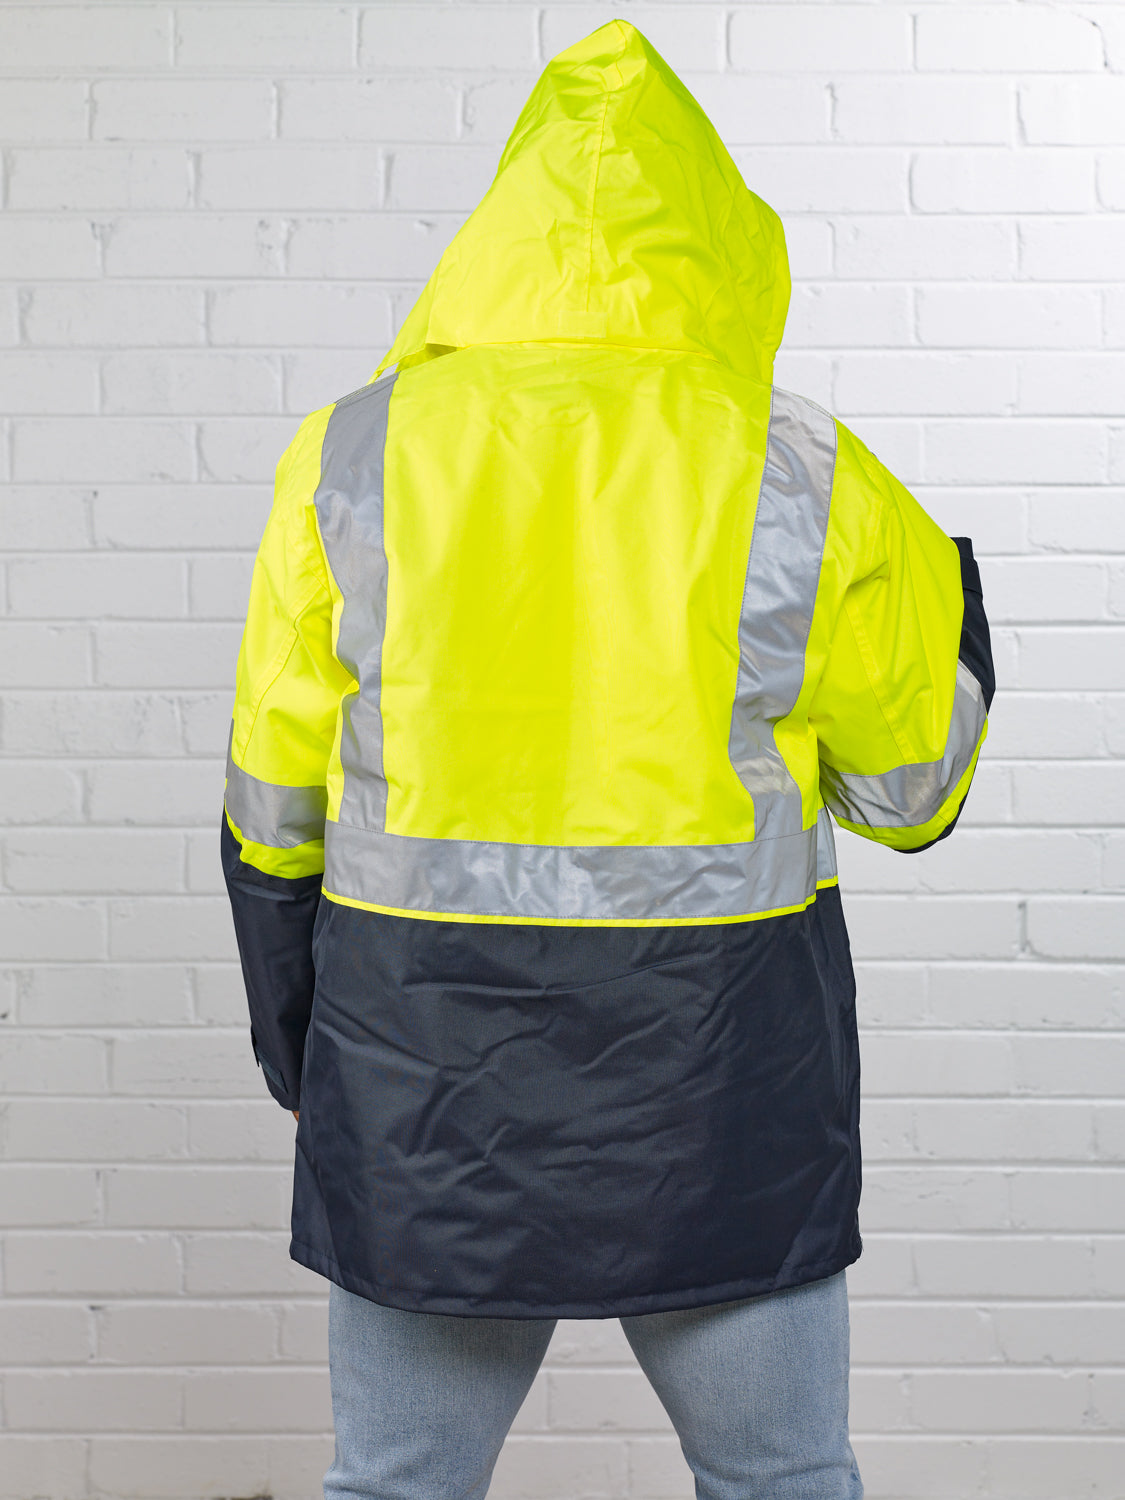 Tempest 4 in 1 Safety Jacket